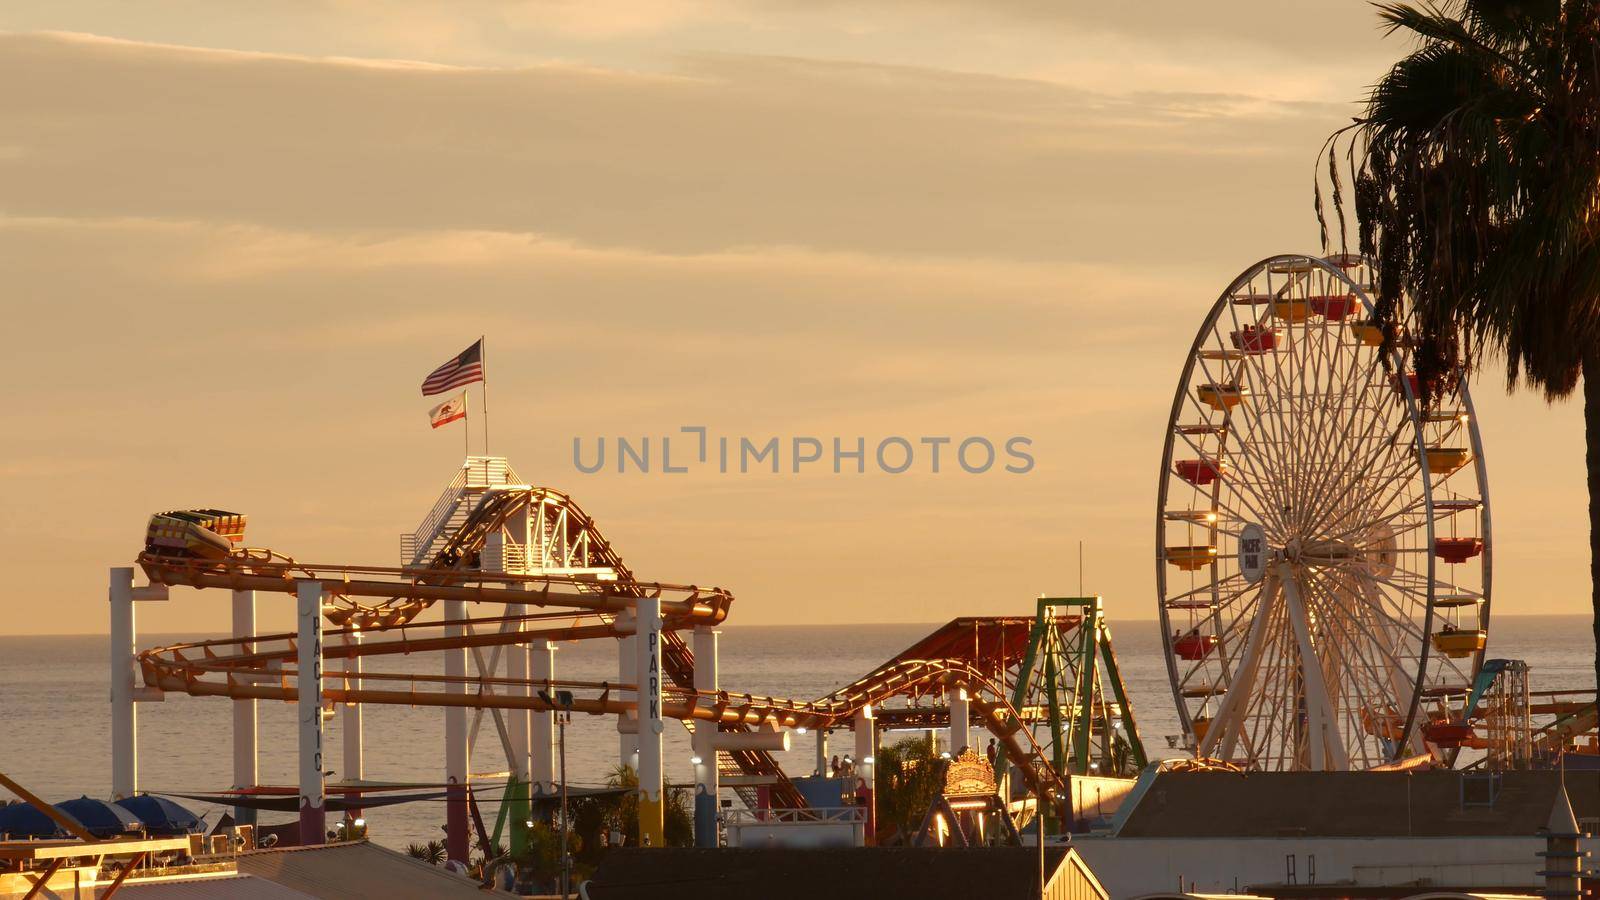 Classic ferris wheel, amusement park on pier in Santa Monica pacific ocean beach resort. Summertime California aesthetic, iconic view, symbol of Los Angeles, CA USA. Sunset golden sky and attractions.